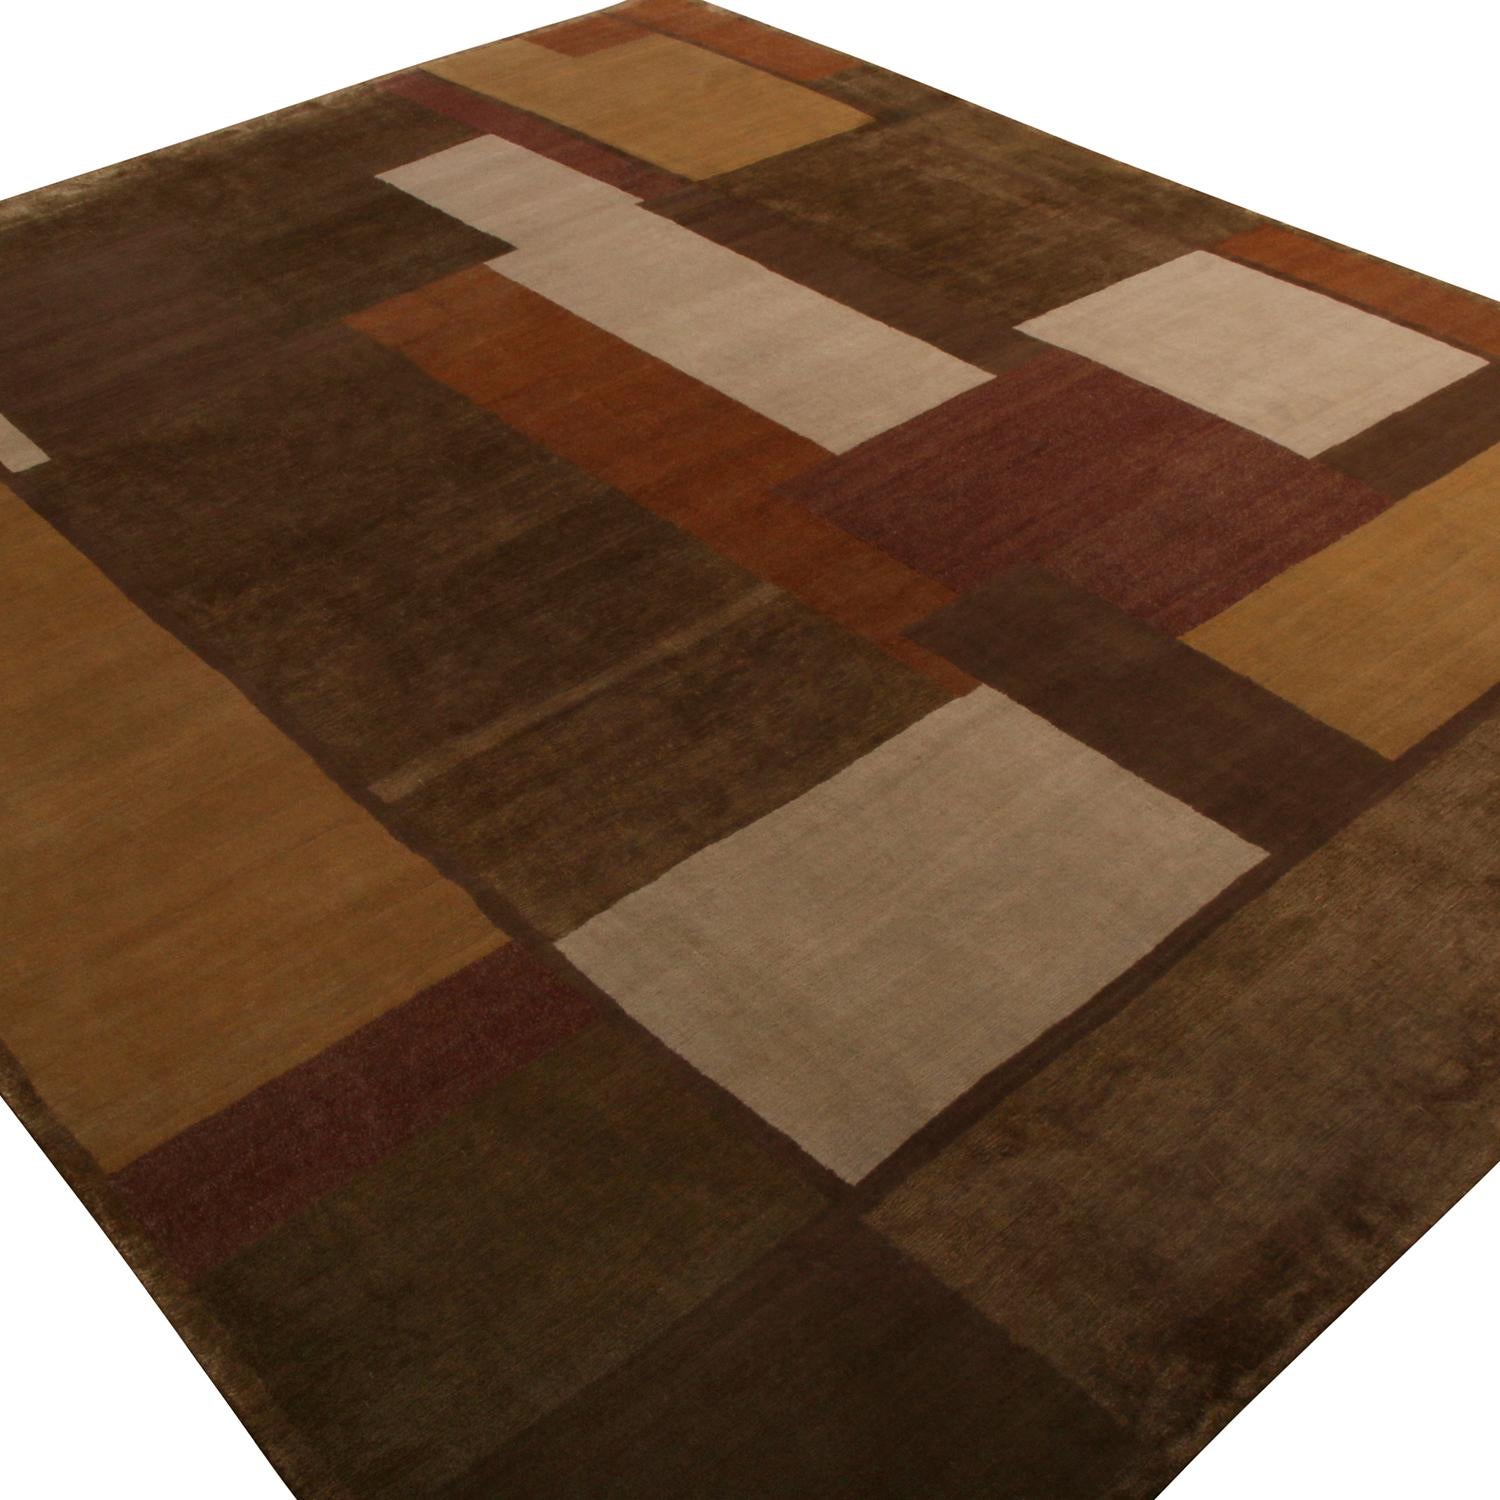 Exemplifying cubism and Art Deco sensibilities, this 8x10 rug from Rug & Kilim’s New & Modern collection features a geometric pattern in panel style flourishing in luscious brown & cream tones for an enticing pagination on scale. Hand-knotted in a